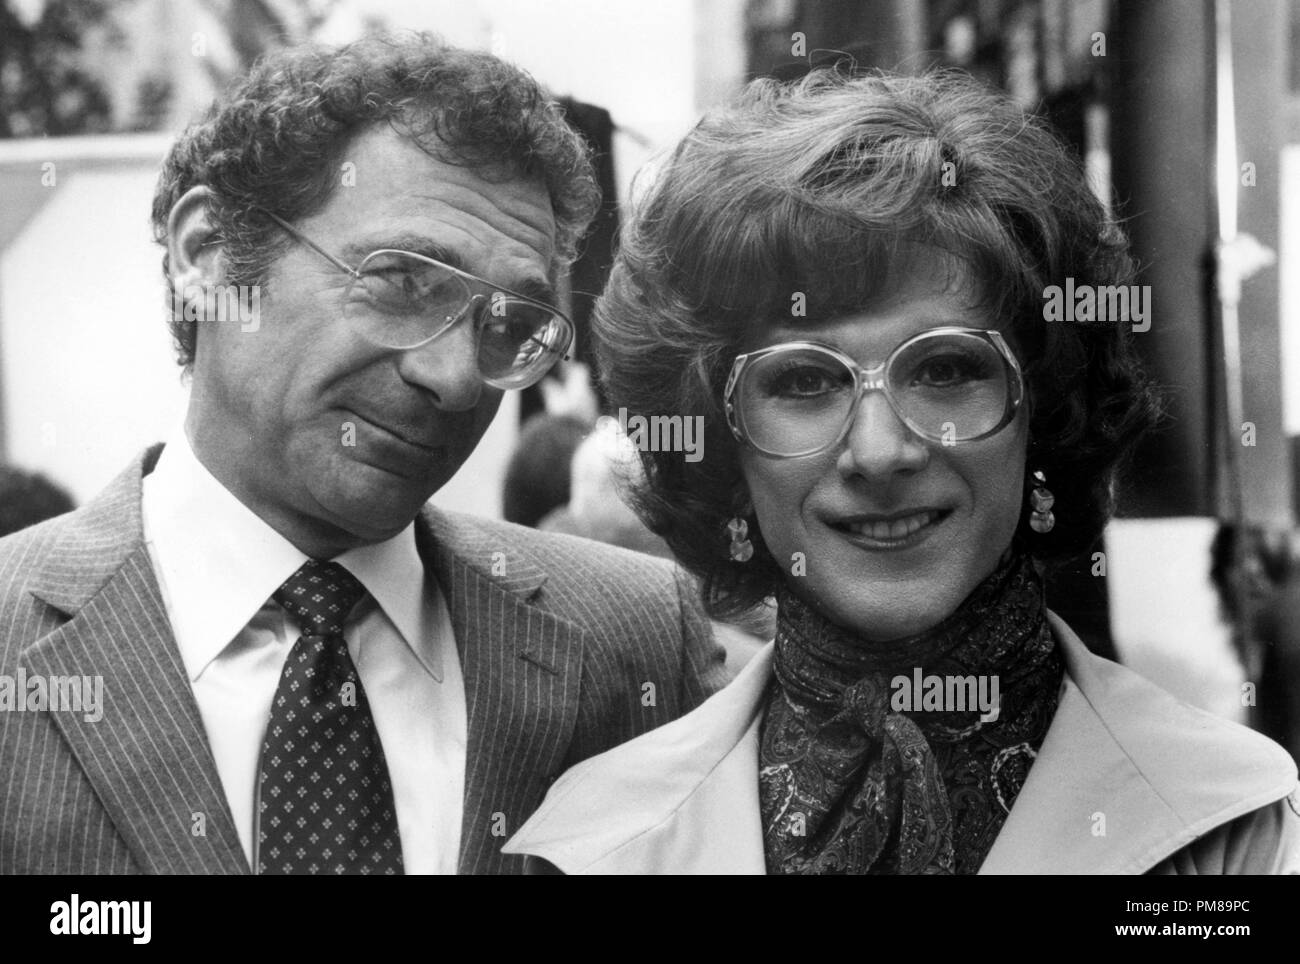 Studio Publicity Still from 'Tootsie' Sydney Pollack, Dustin Hoffman © 1982 Columbia All Rights Reserved   File Reference # 31710017THA  For Editorial Use Only Stock Photo